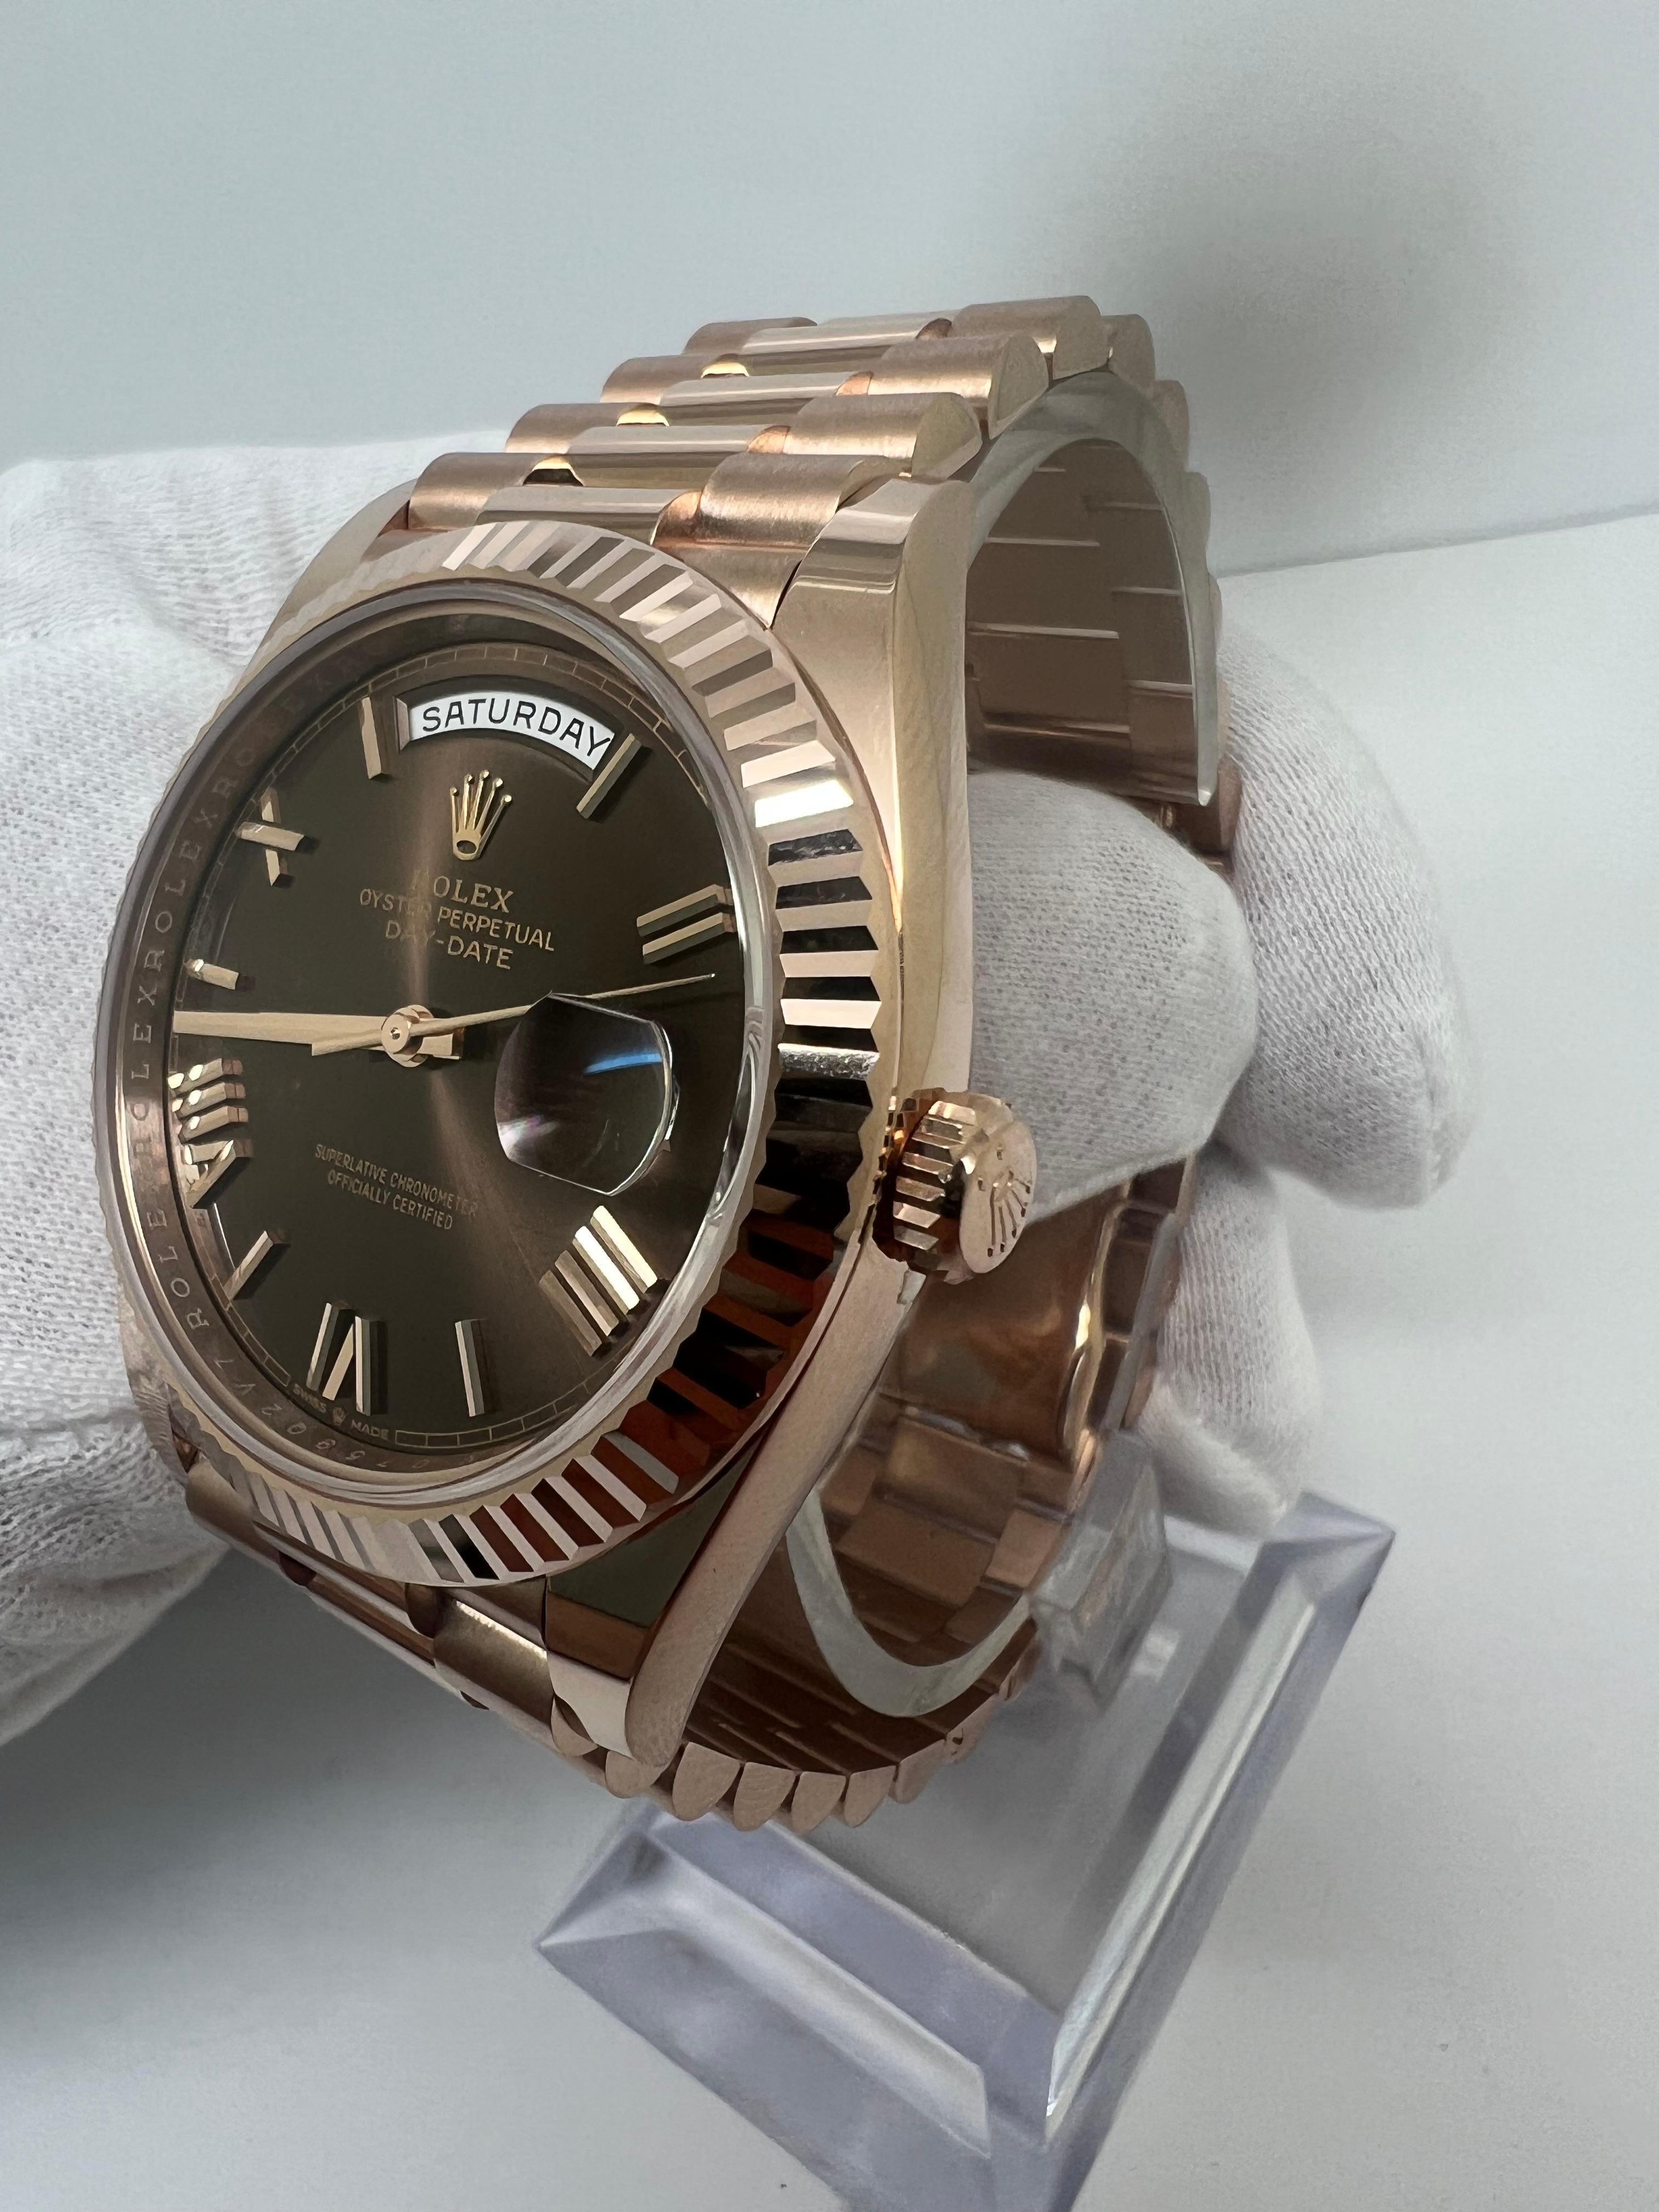 New Rolex Day-Date 40 Rose Gold President 228235 Wristwatch - Chocolate Roman

dated 12/22

complete set

free overnight shipping

shop with confidence

Evita diamonds